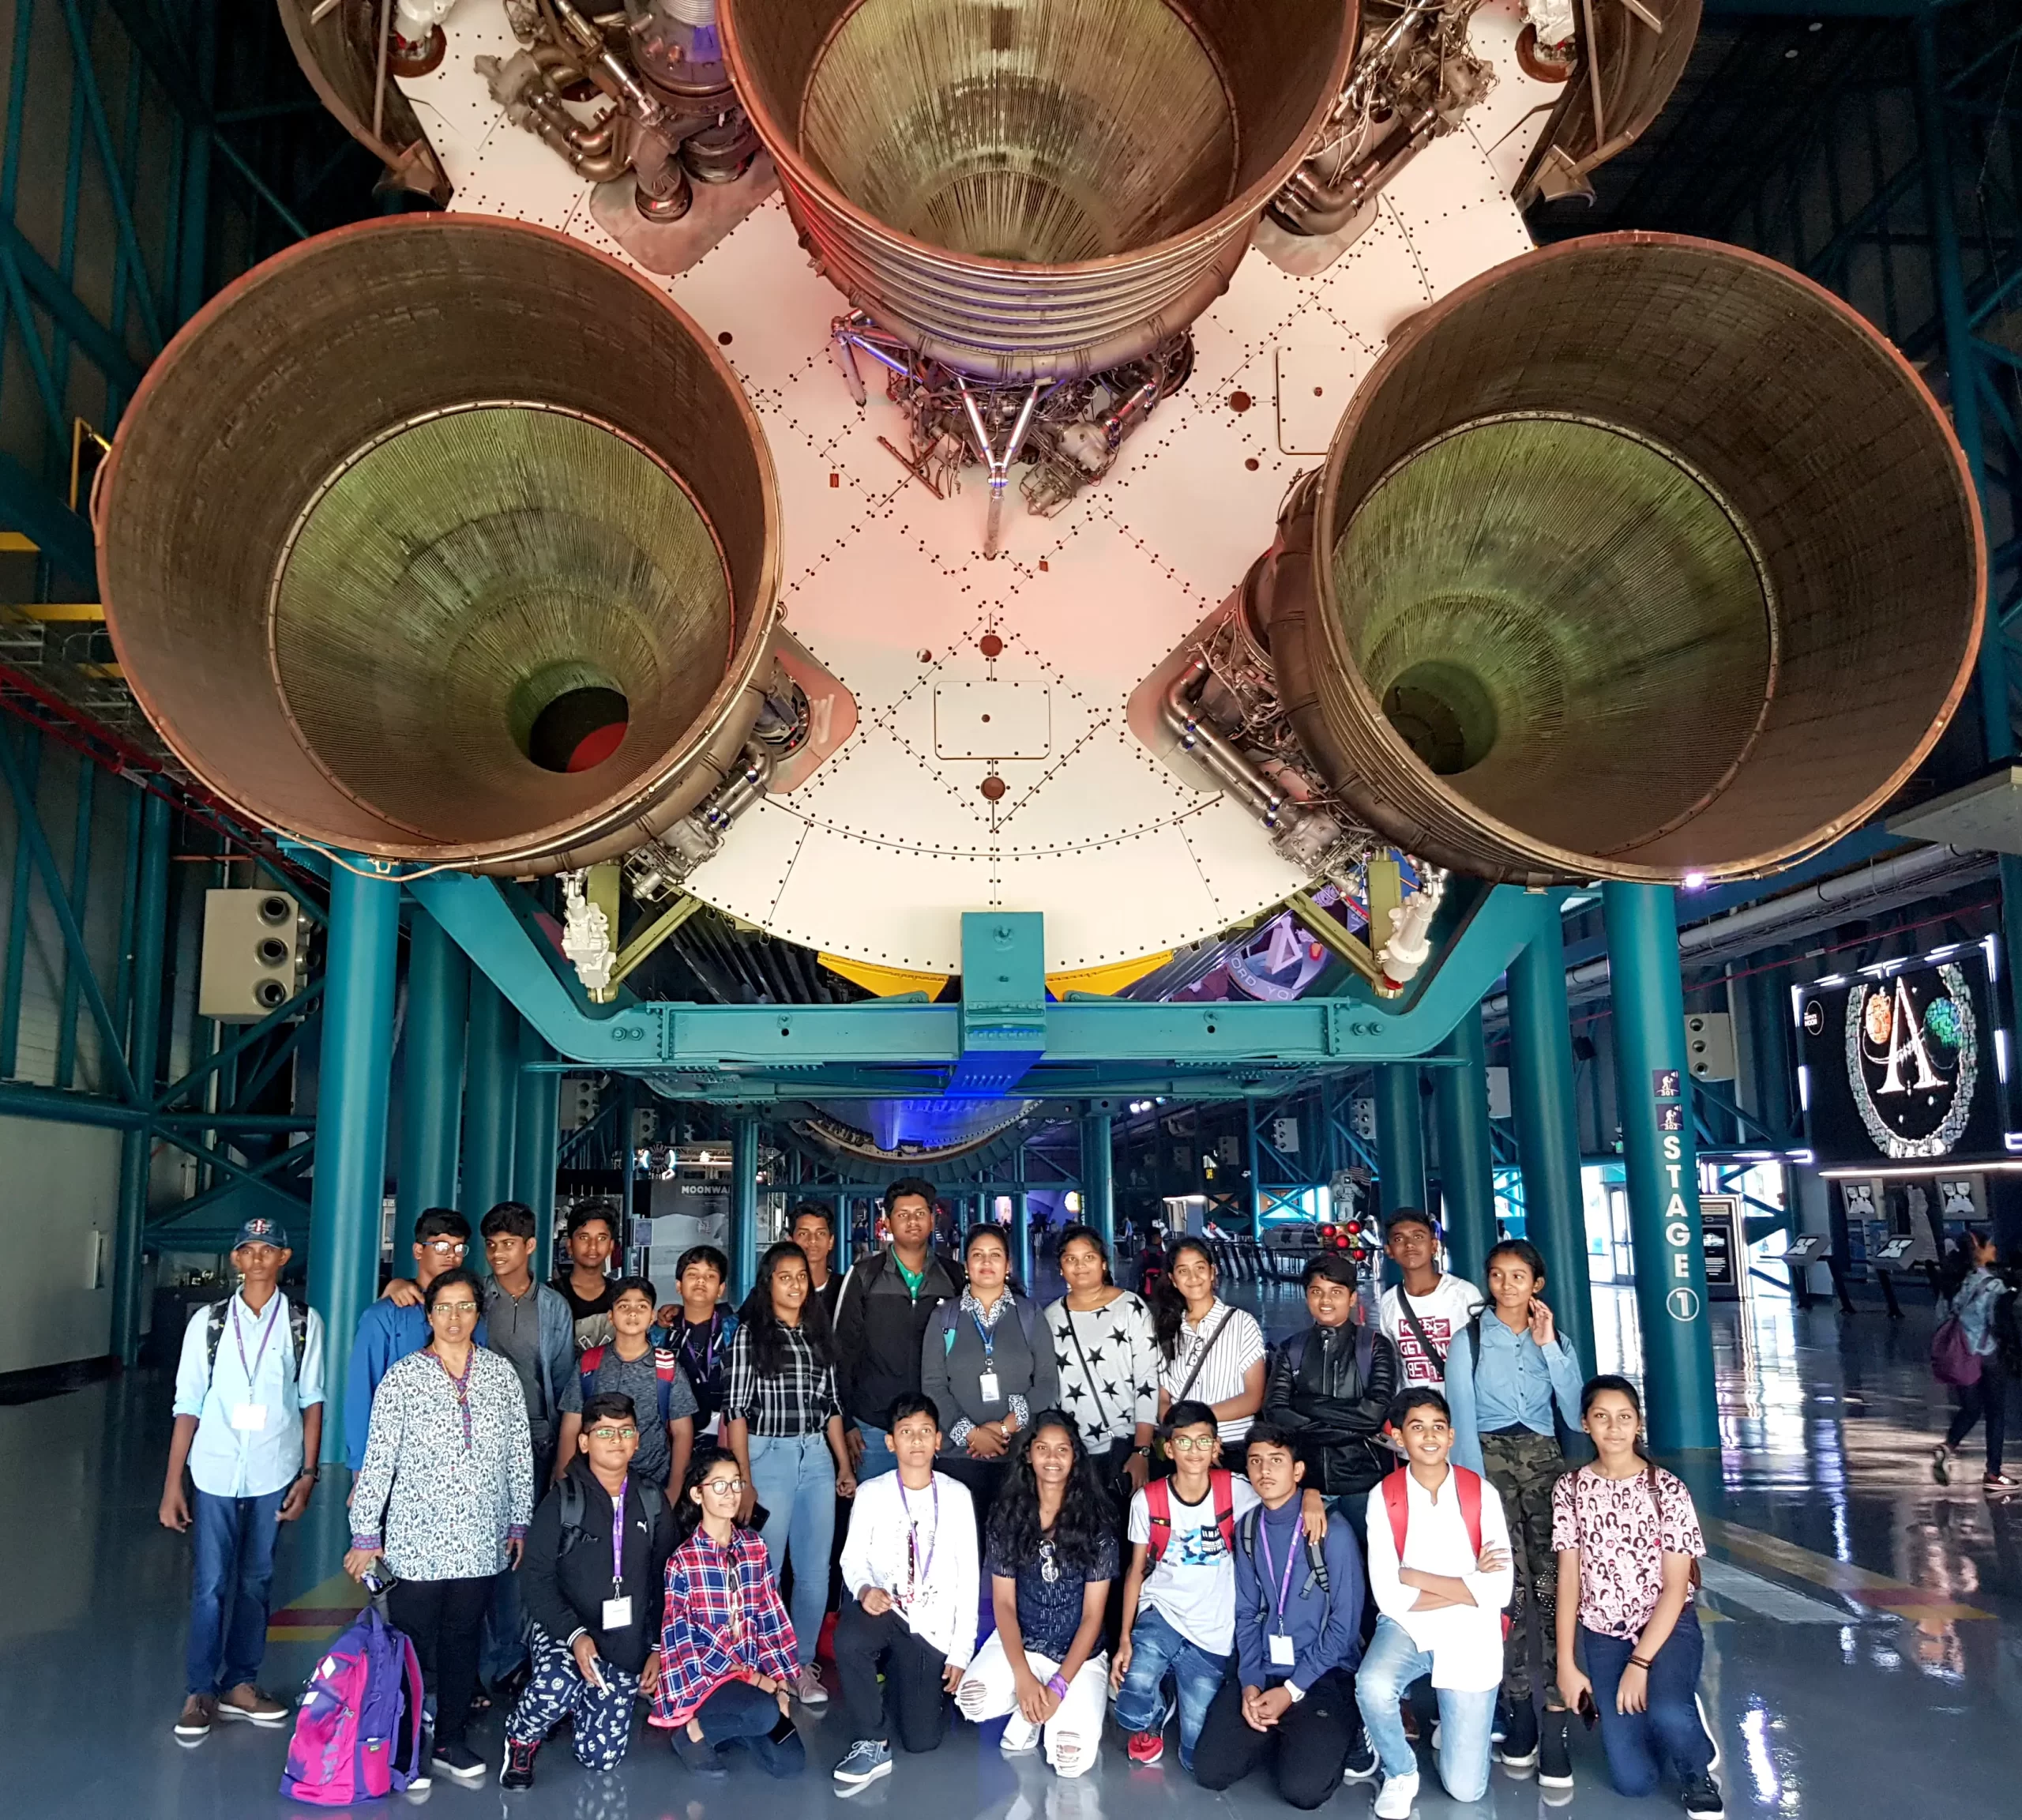 Students clicking picture standing in front of platform having rocket during visit to NASA.